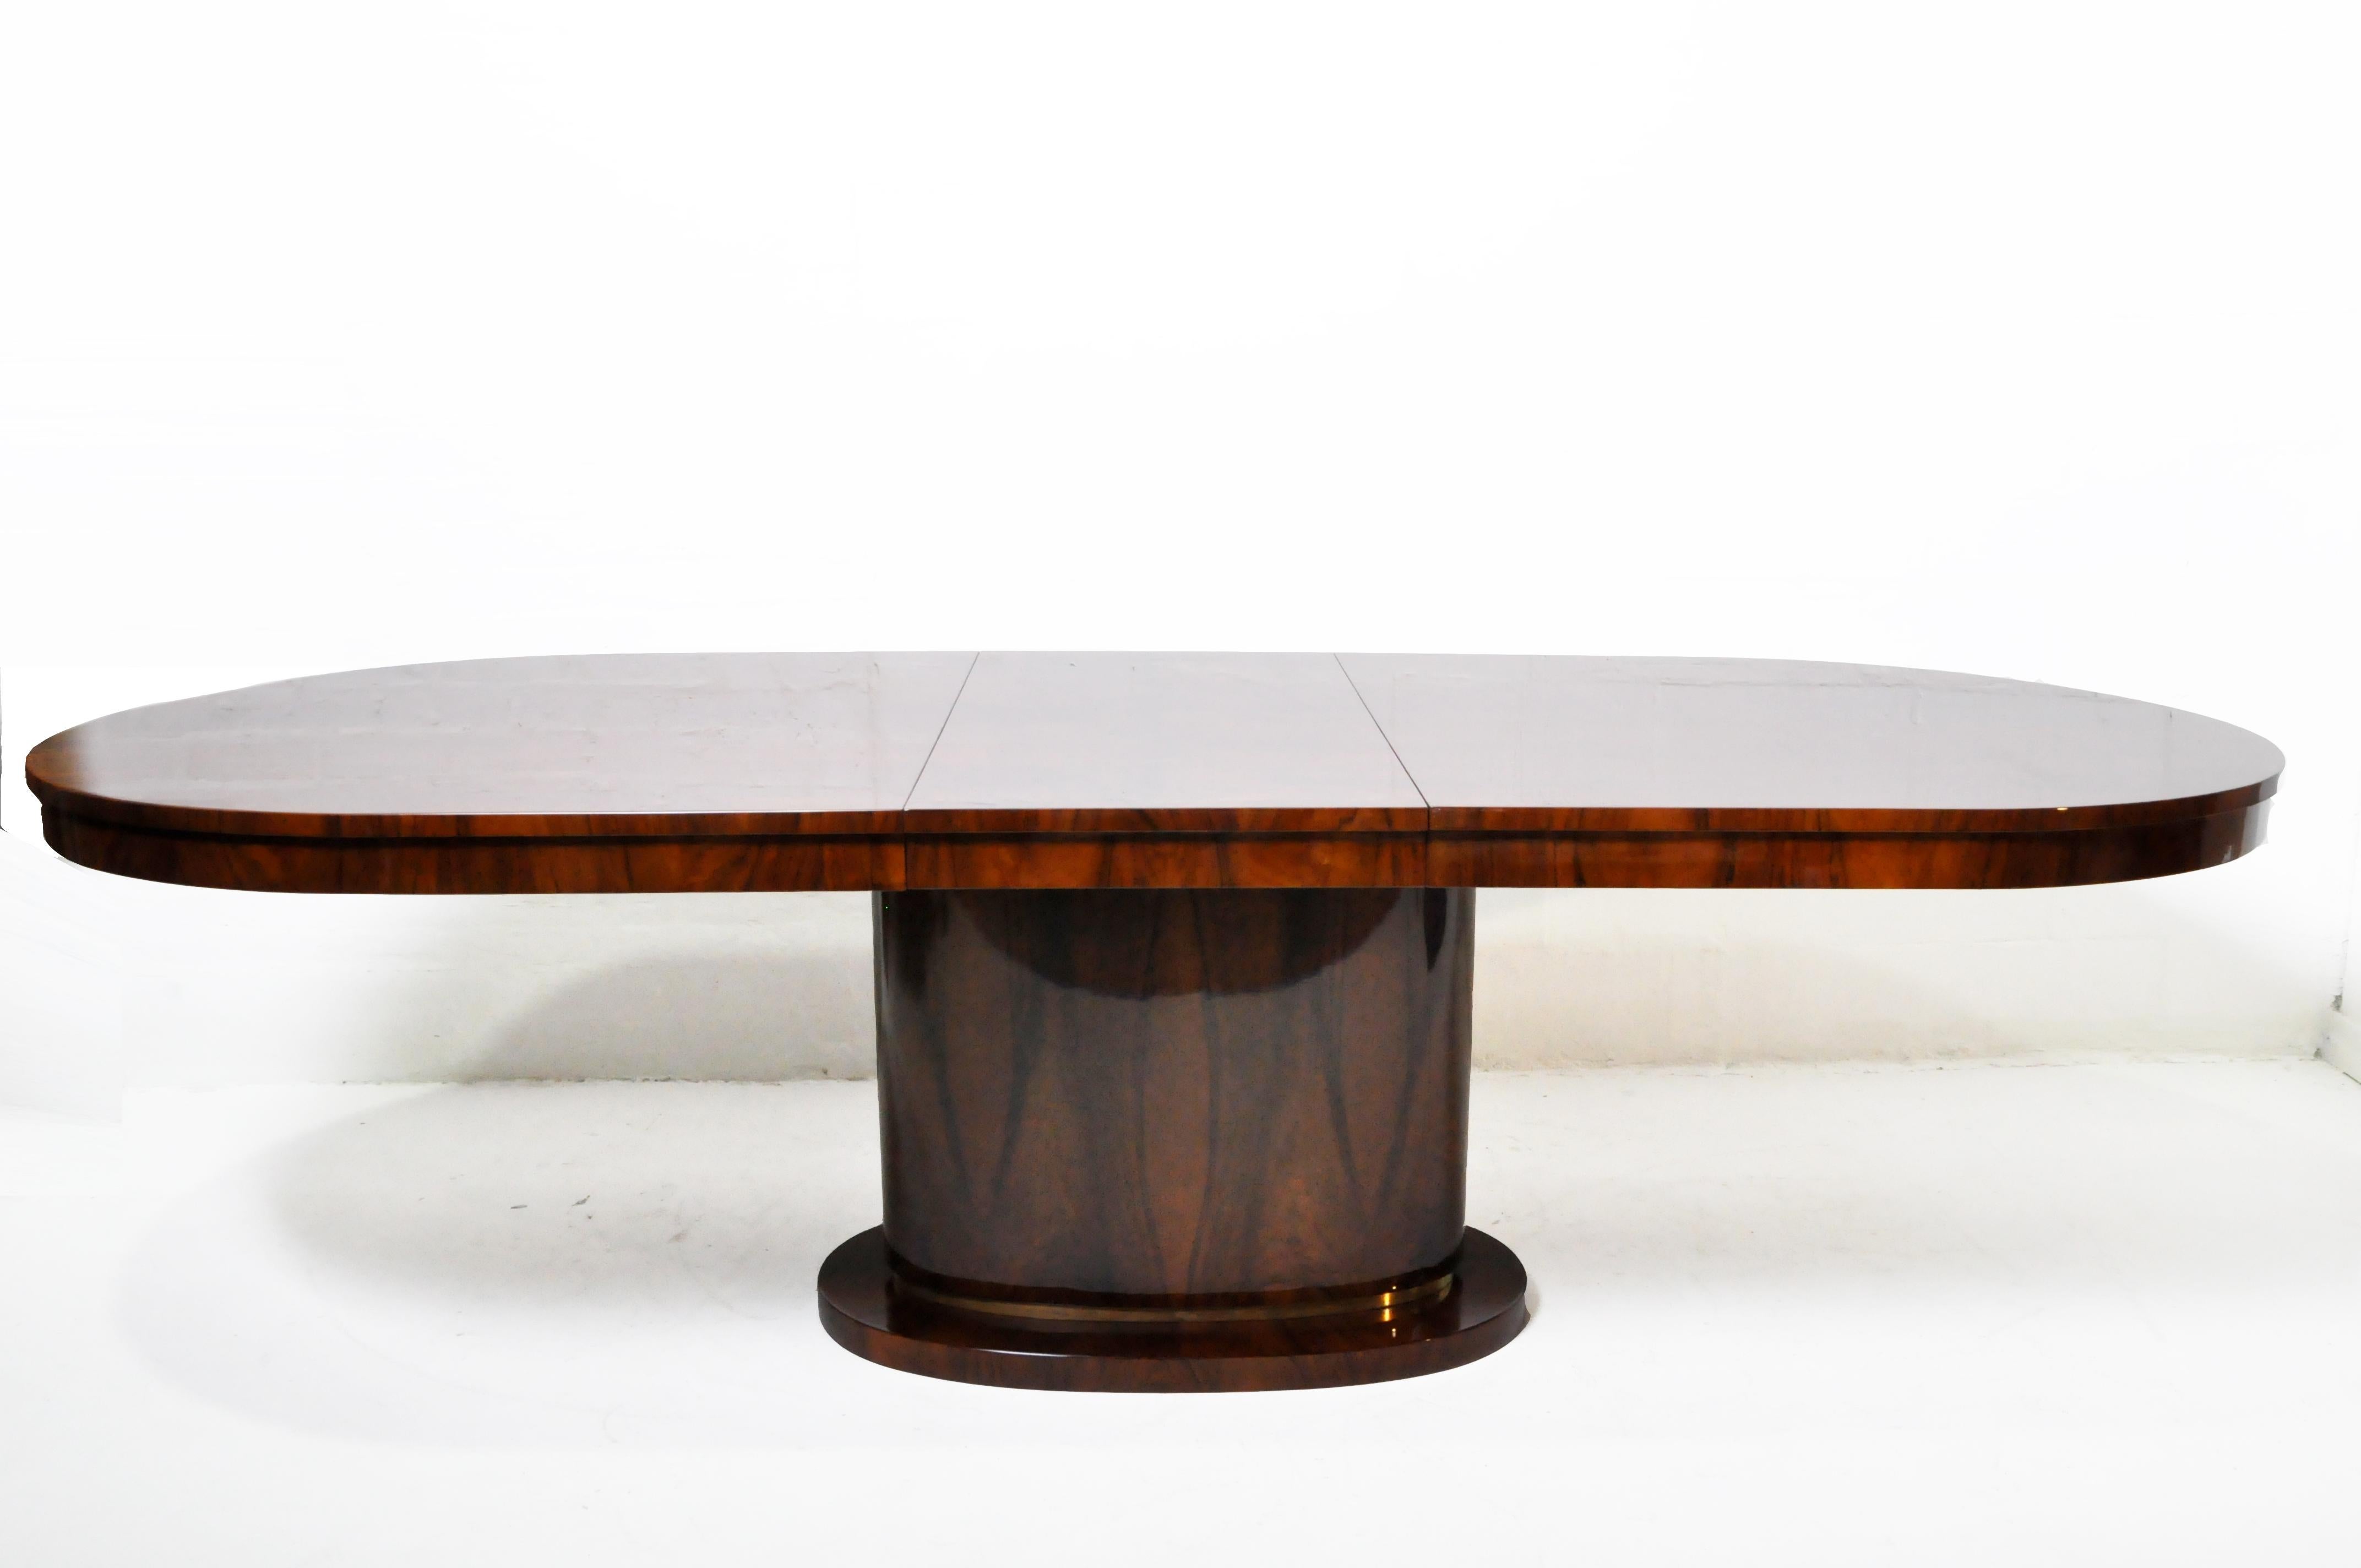 This striking Hungarian Art Deco table closely follows classic French Art Deco dining table designs from the 1930's. With its pedestal base, brass fittings and polished walnut veneer surface, the table has a nautical appearance. It comes with one